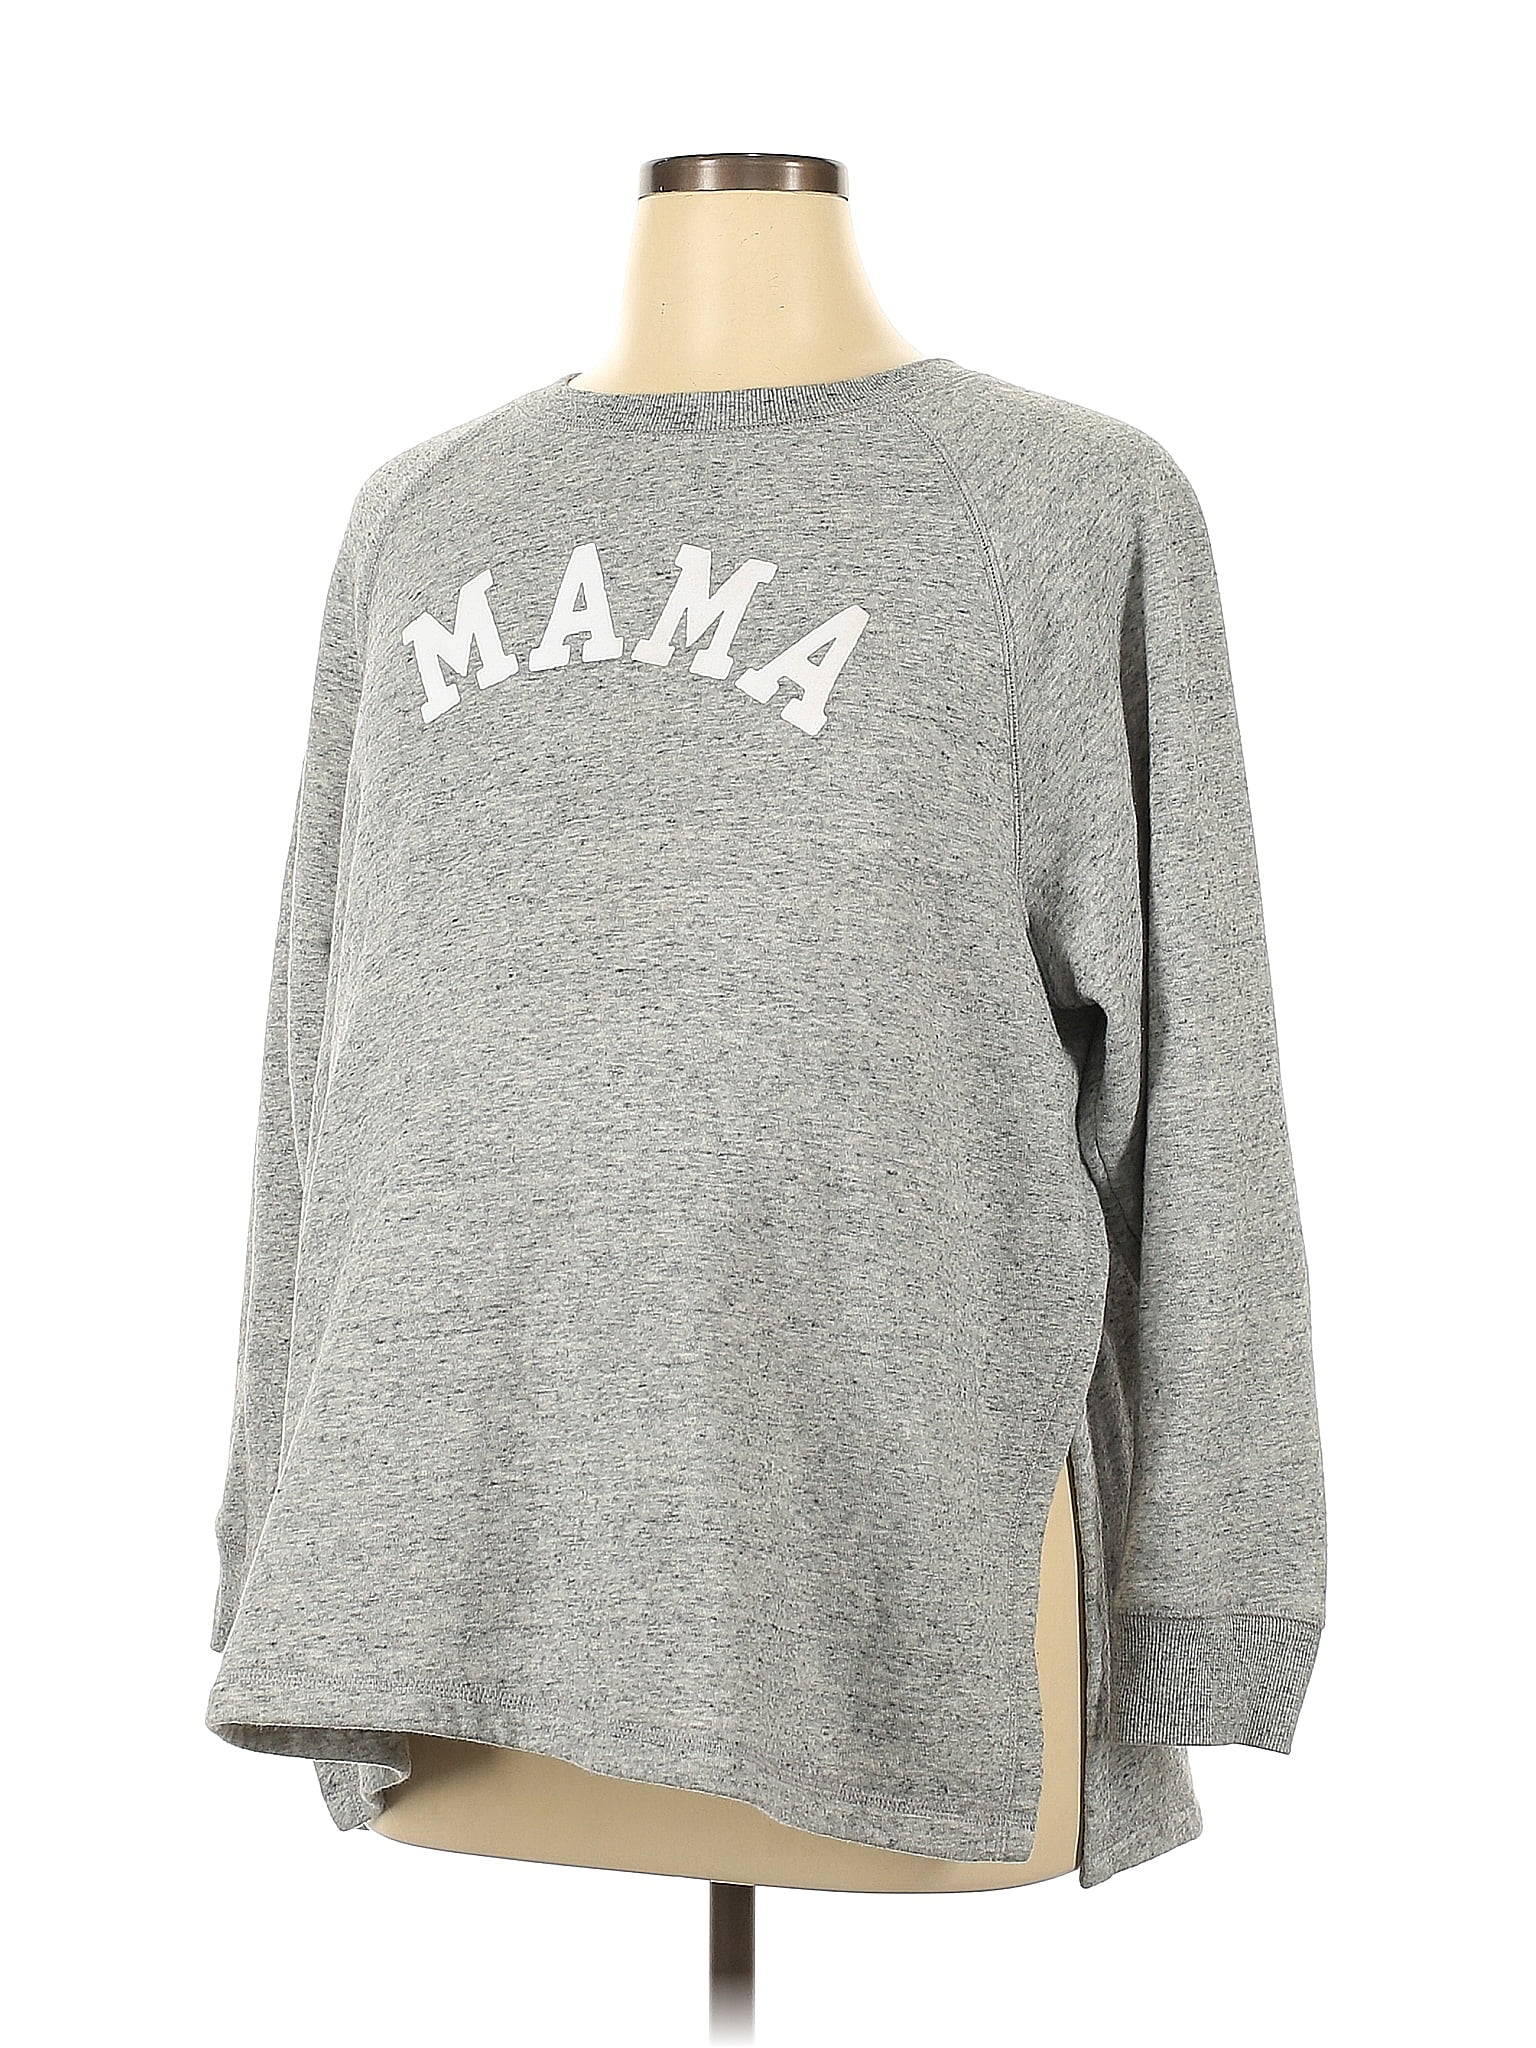 Old Navy - Maternity Graphic Marled Gray Sweatshirt Size XL (Maternity) -  37% off